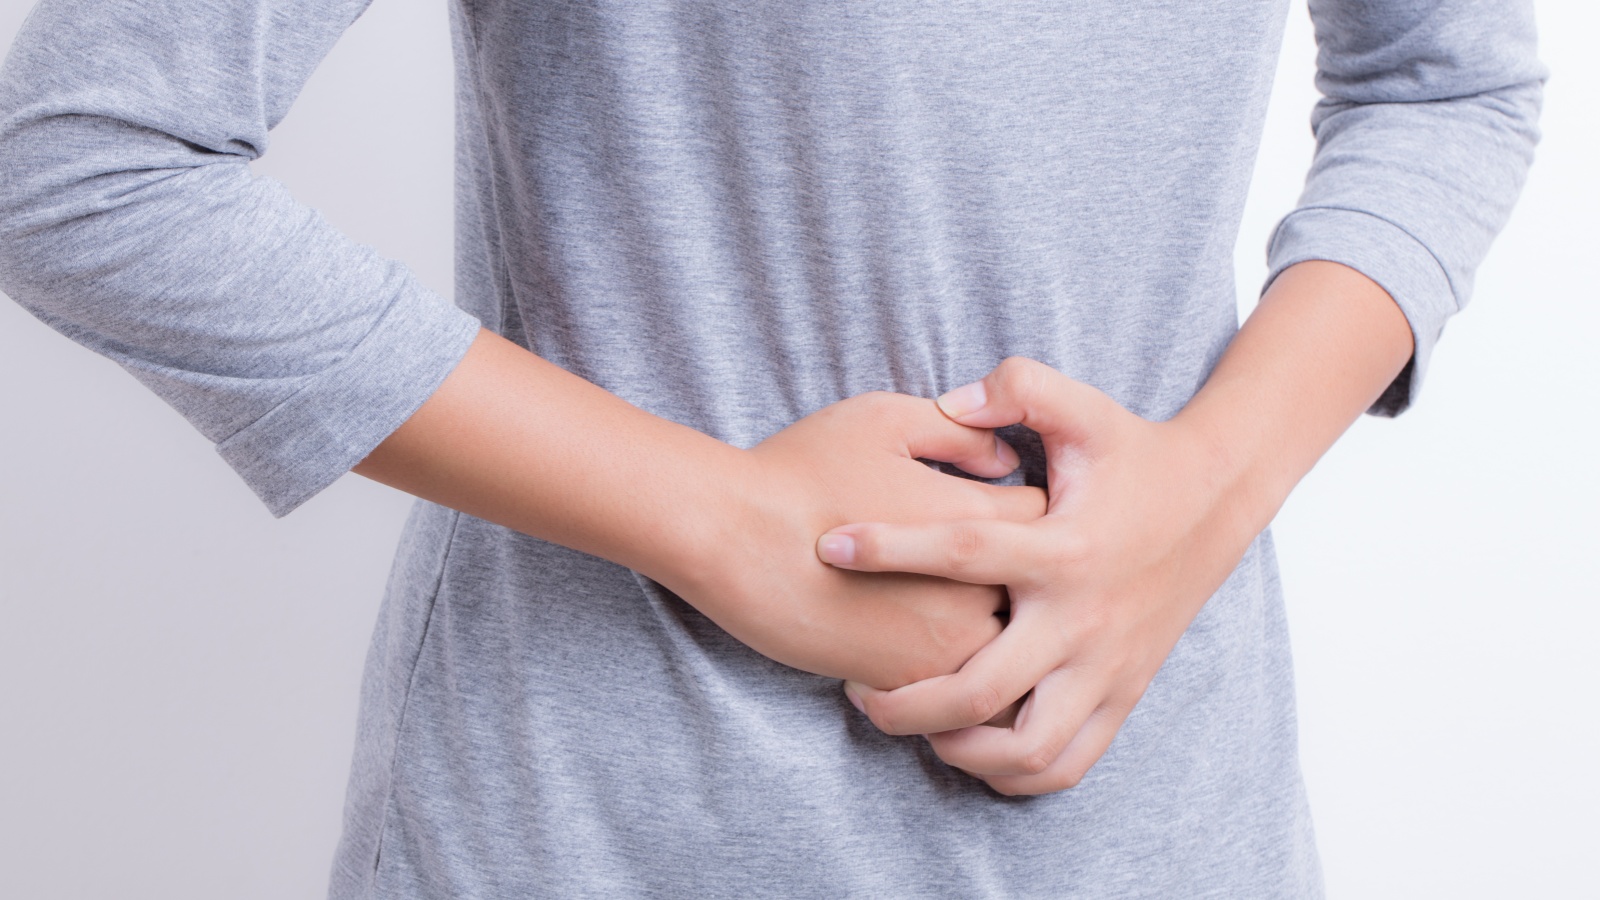 Ulcerative colitis is a painful inflammatory bowel disease. Photo by Backgroundy via Shutterstock.com